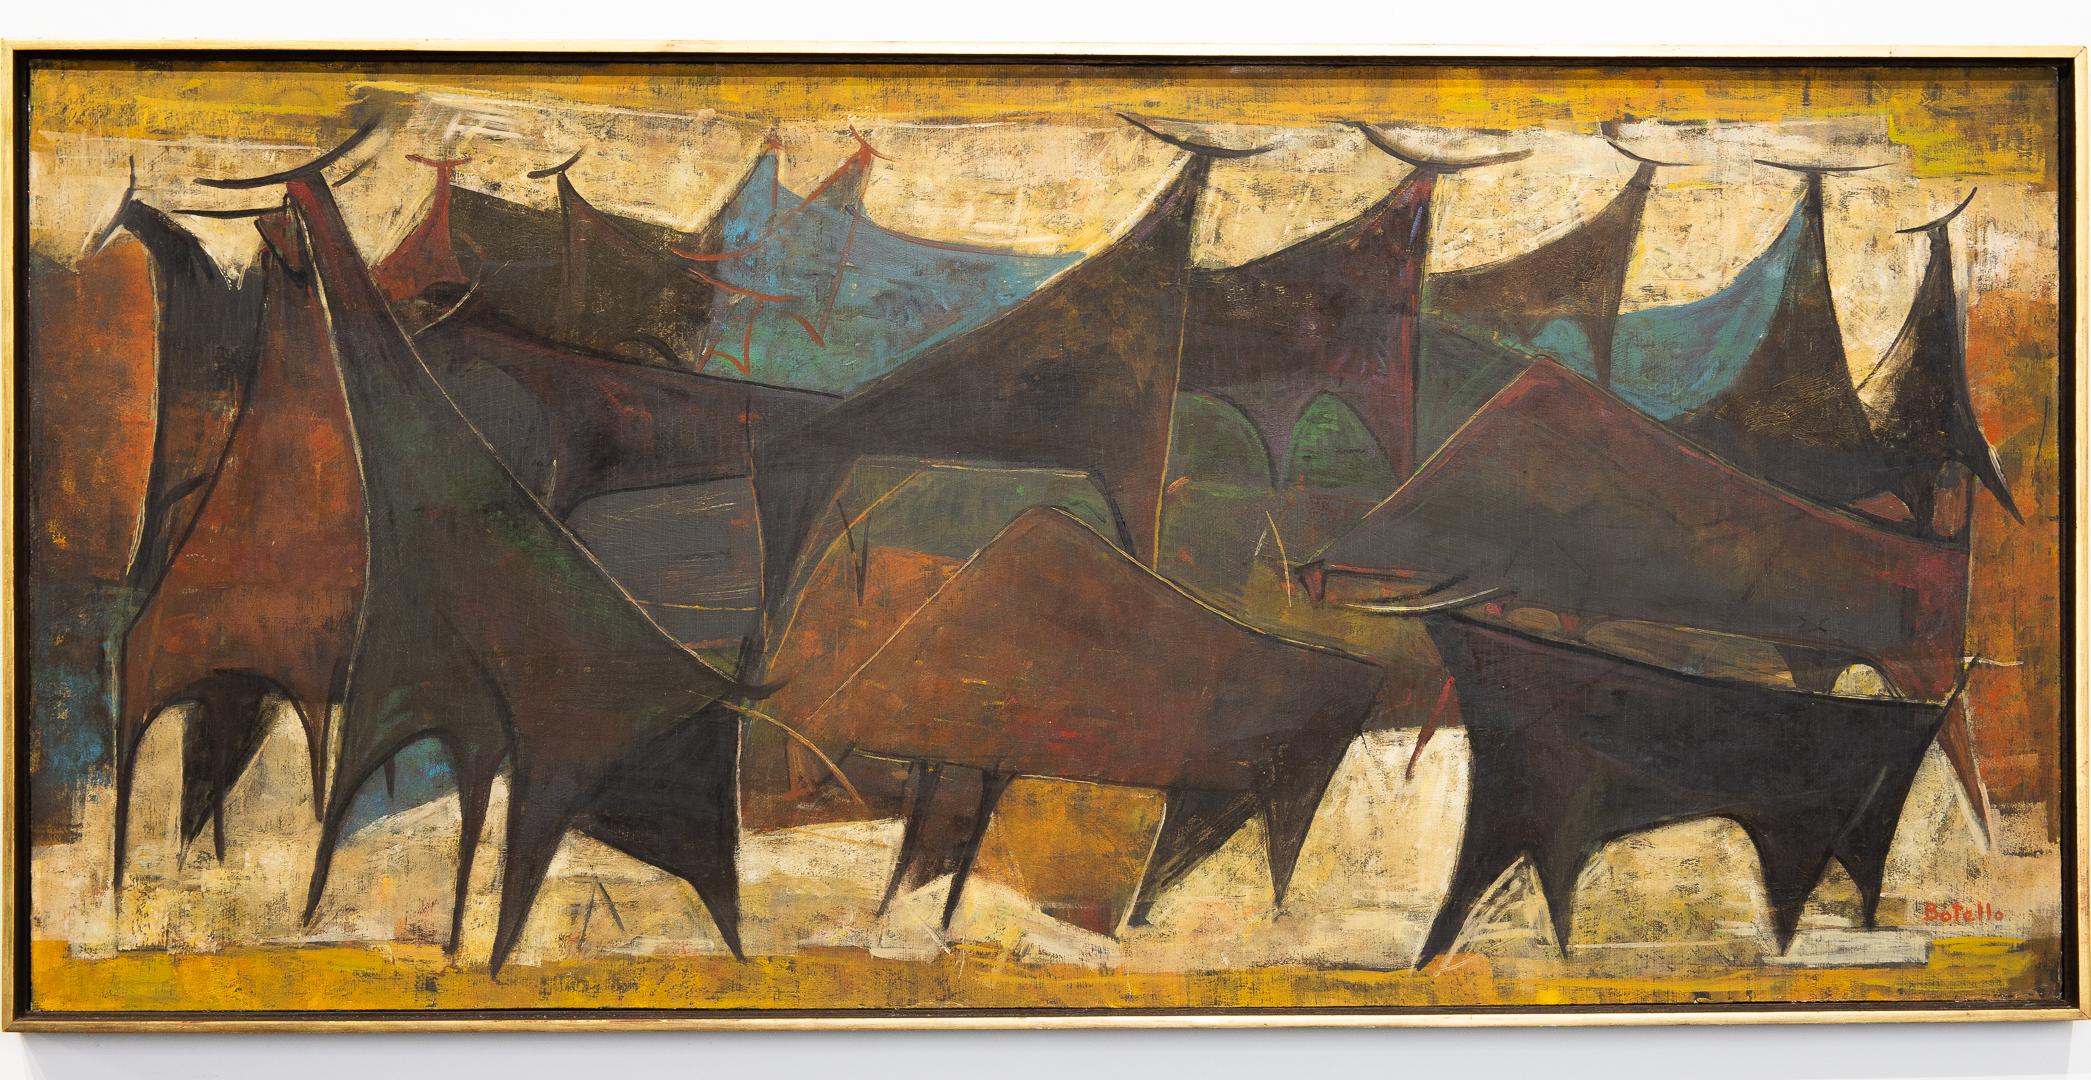 Angel Botello Abstract Painting - "Toros Bulls" Abstracted Figurative Bulls, Oil on Wood Panel, Signed